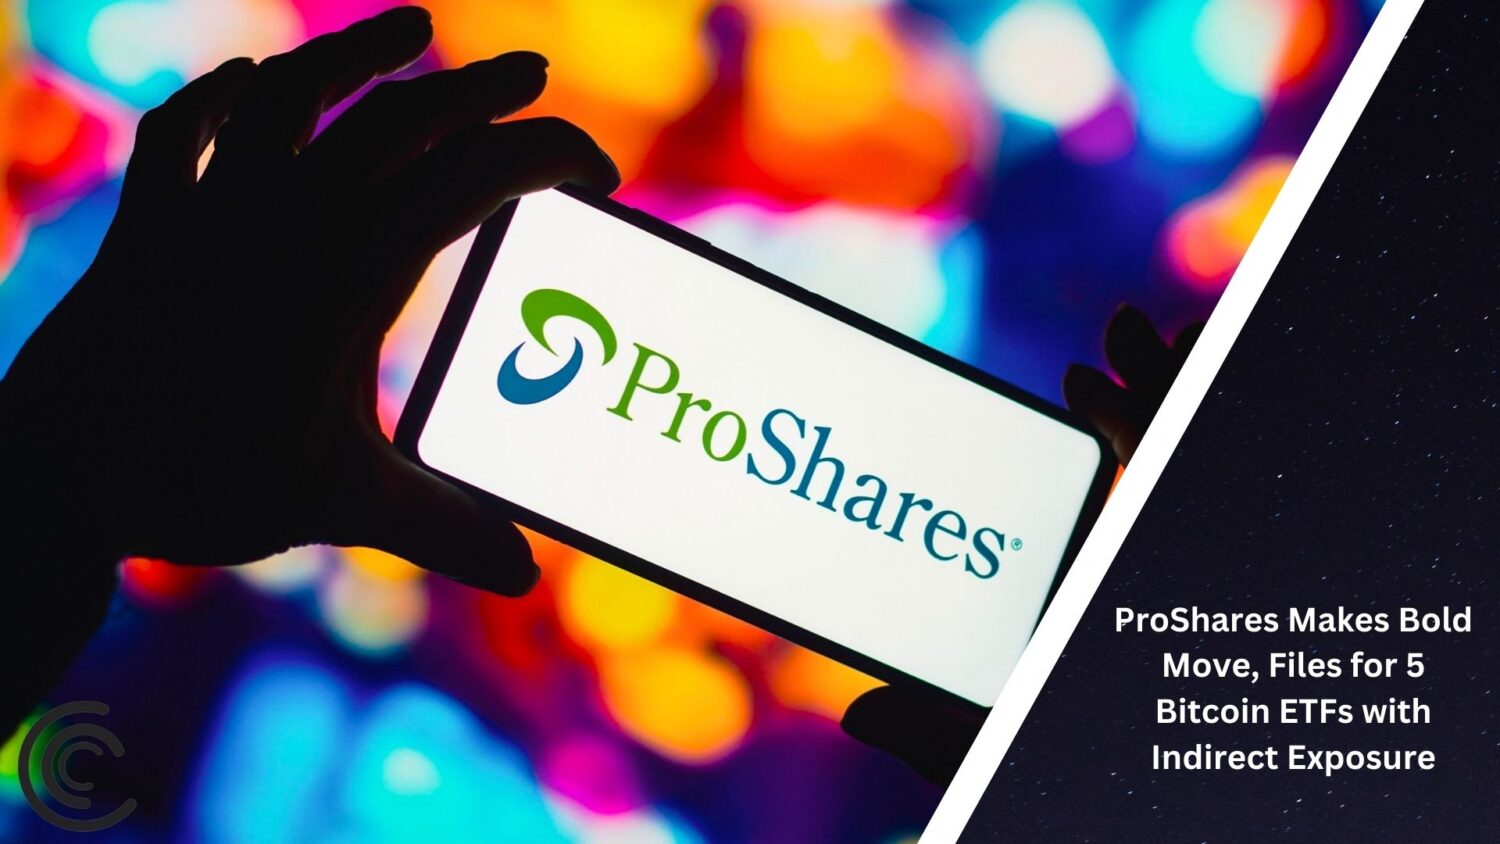 Proshares Makes Bold Move, Files For 5 Bitcoin Etfs With Indirect Exposure